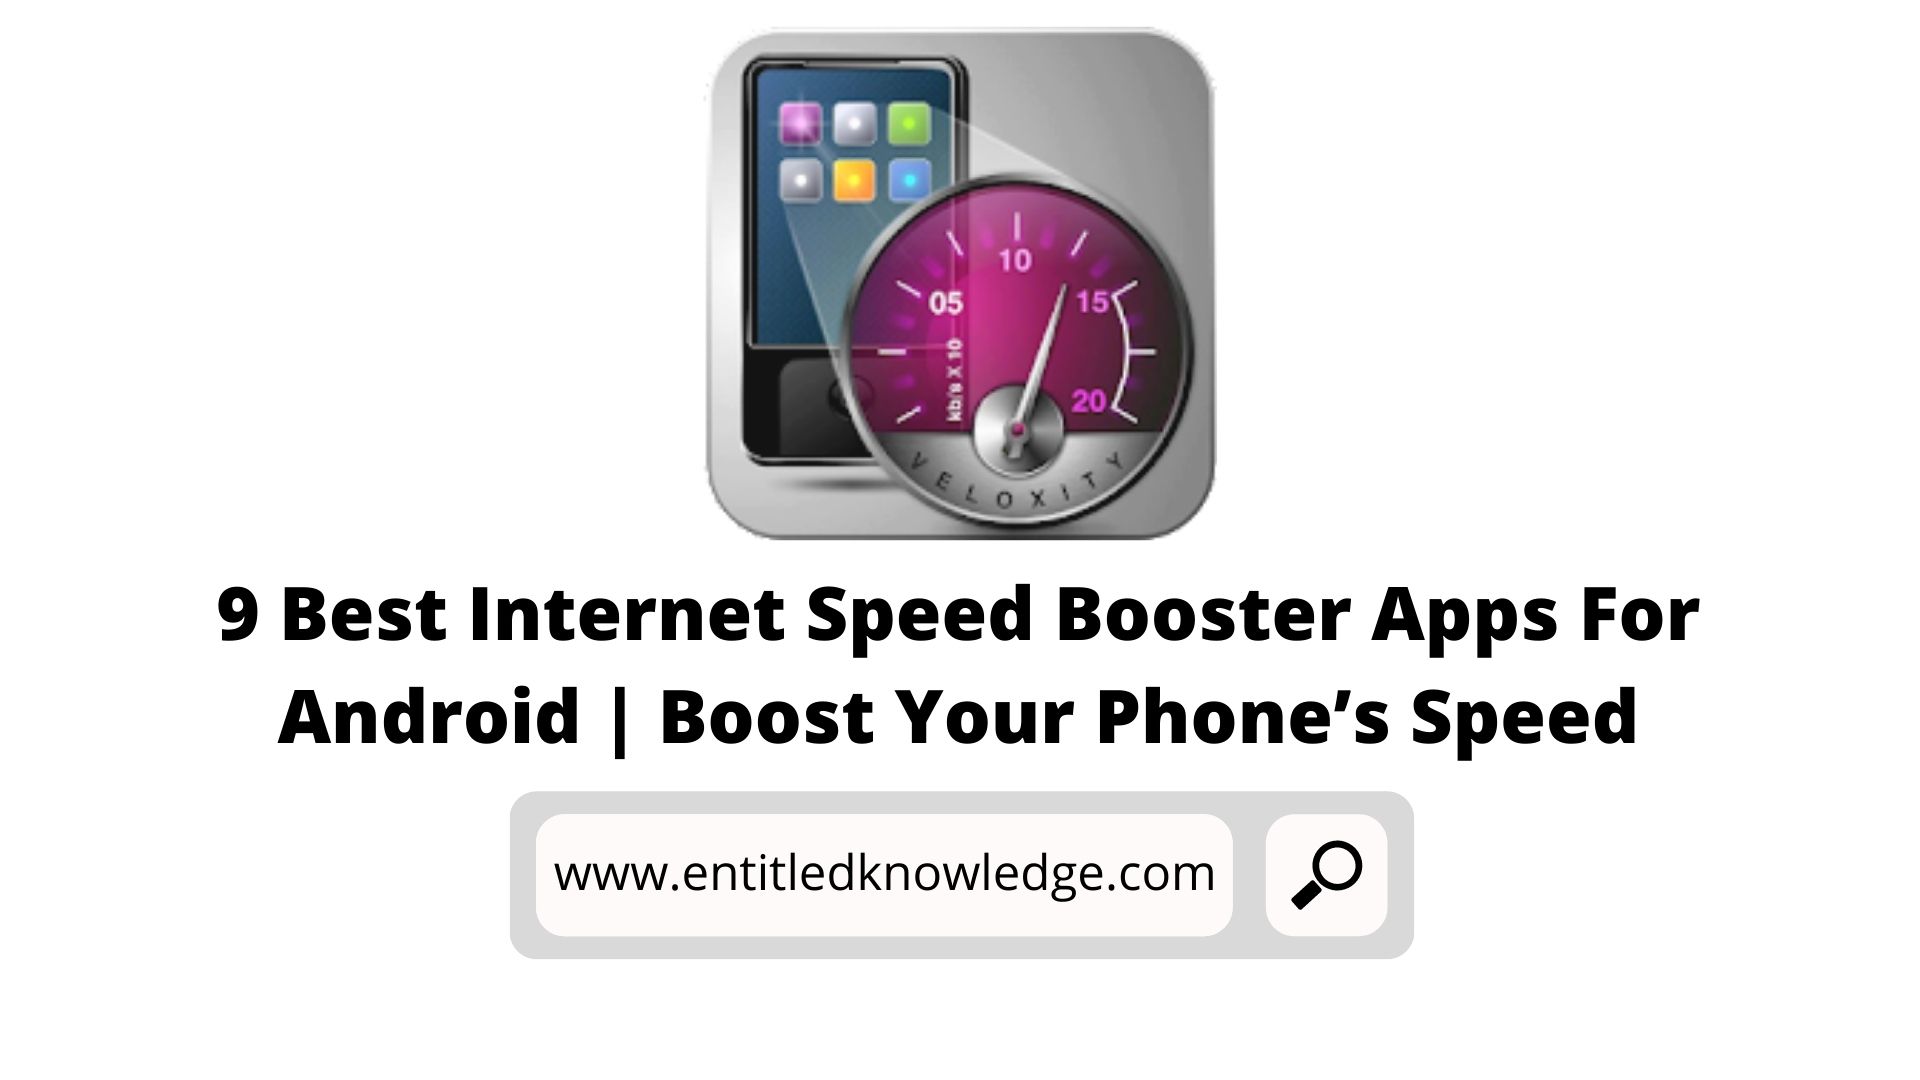 9 Best Internet Speed Booster Apps For Android | Boost Your Phone’s Speed